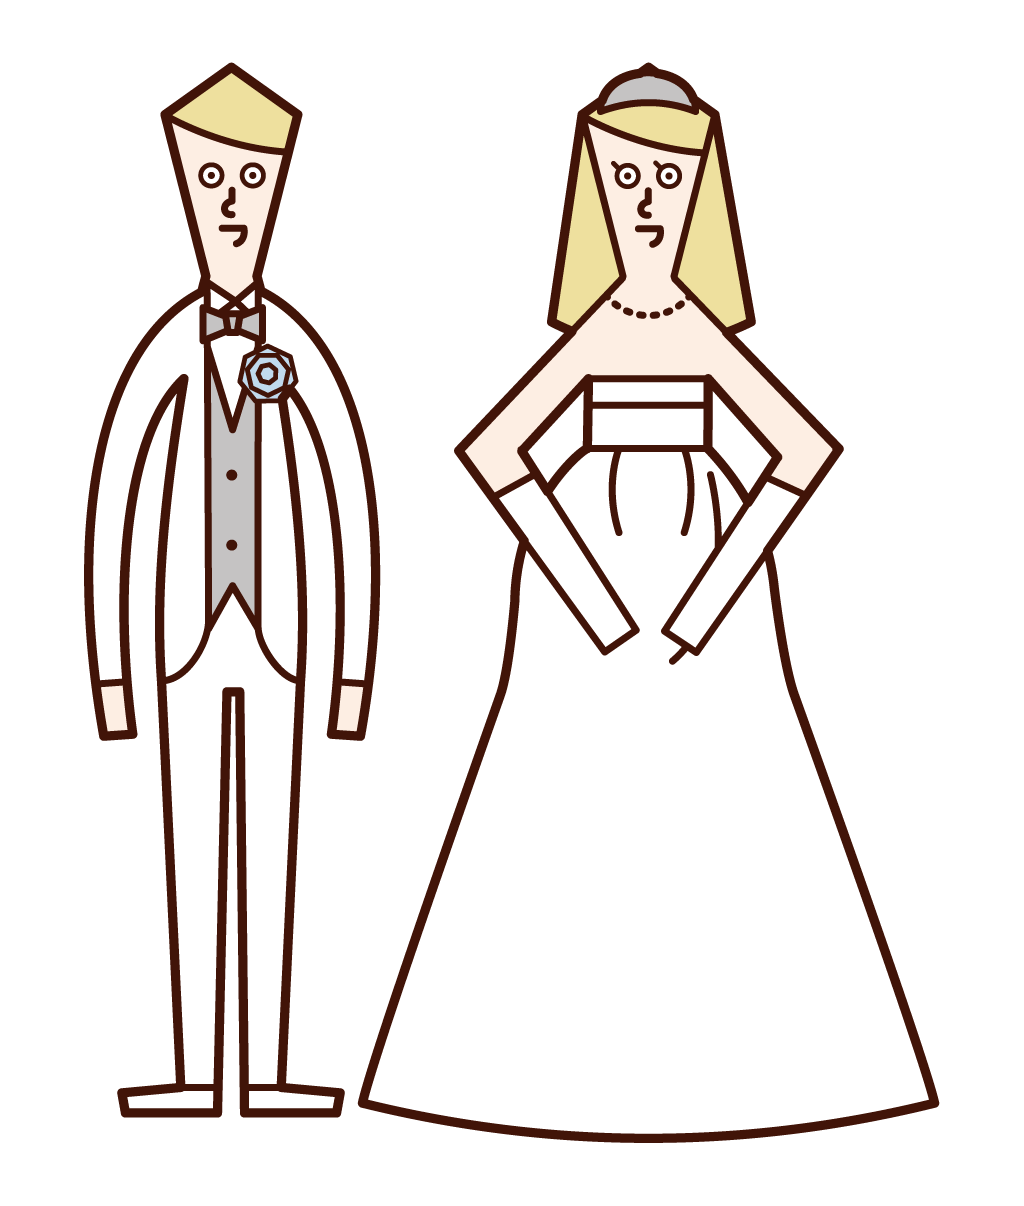 Illustration of a married couple